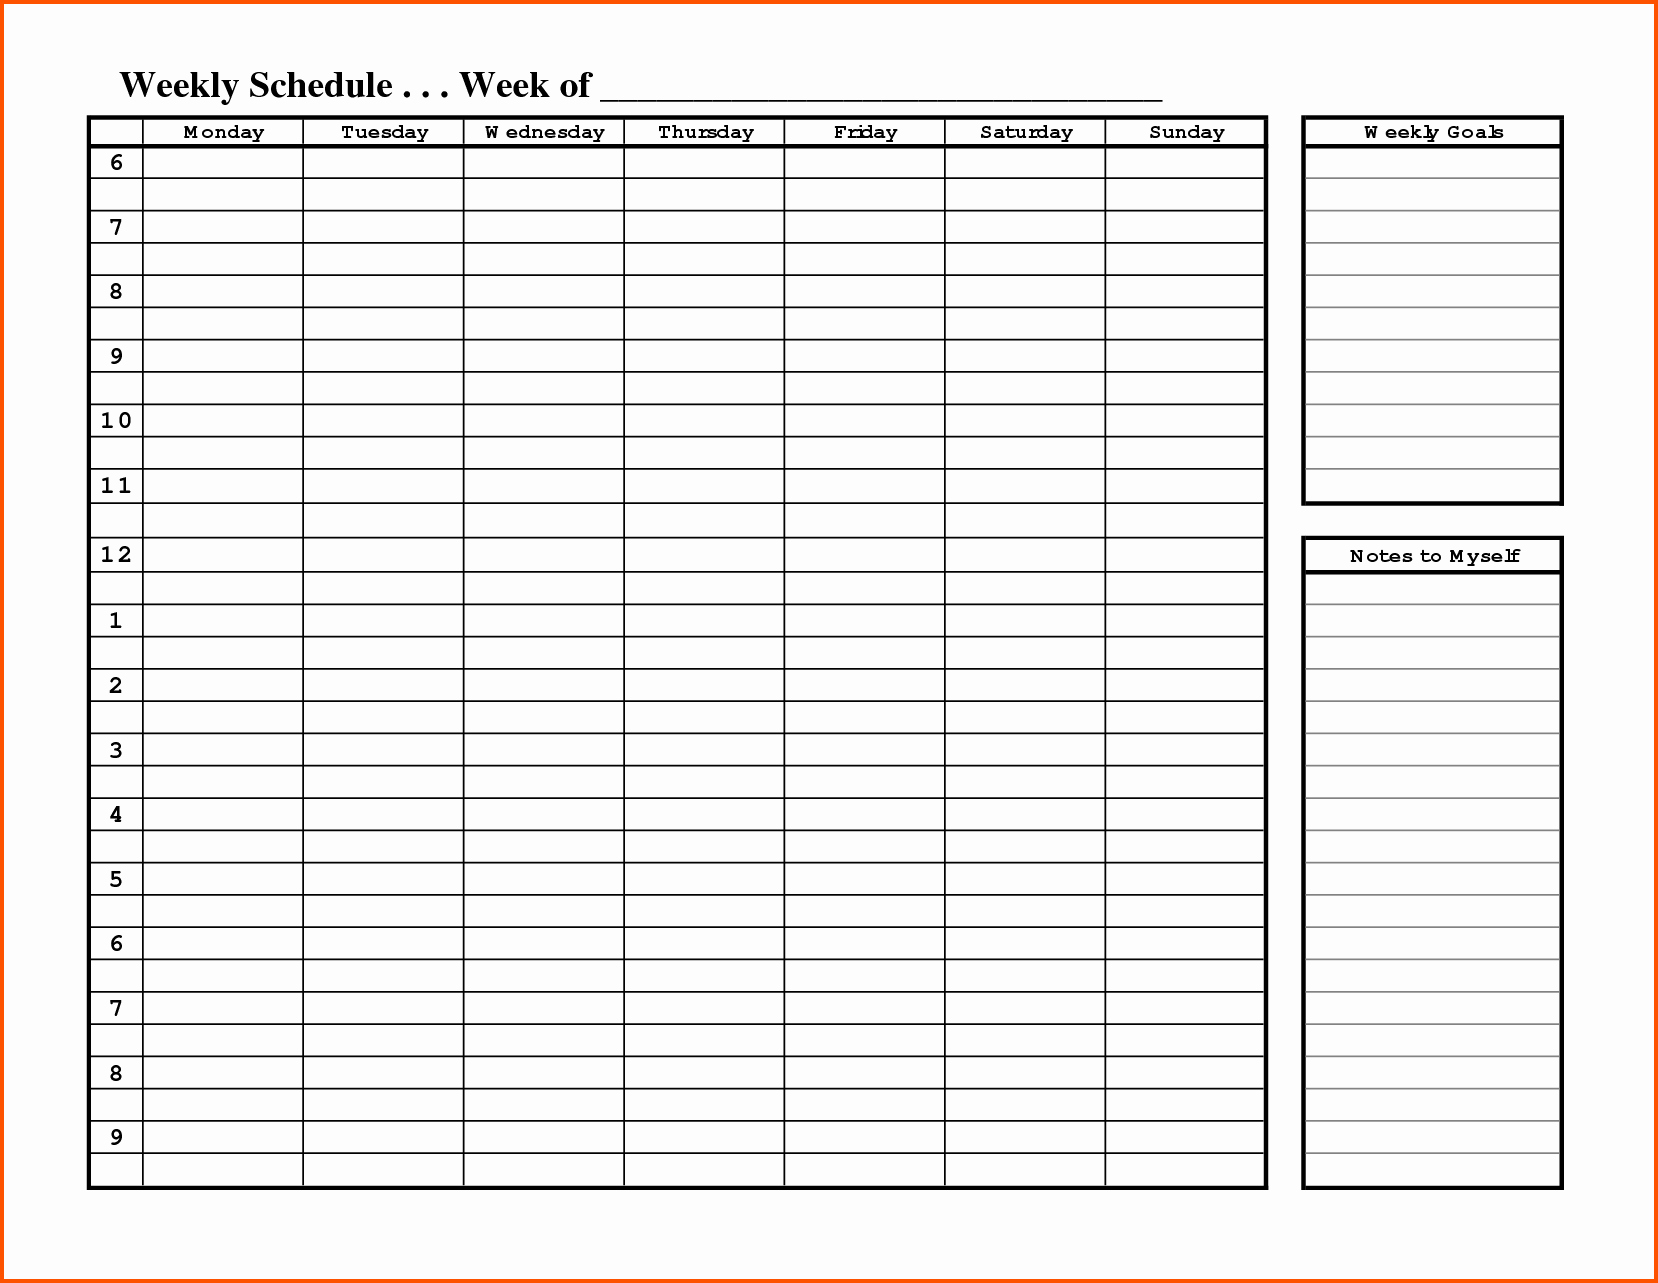 Template for Weekly Schedule Lovely Weekly Schedule Template for Your Inspirations Vatansun